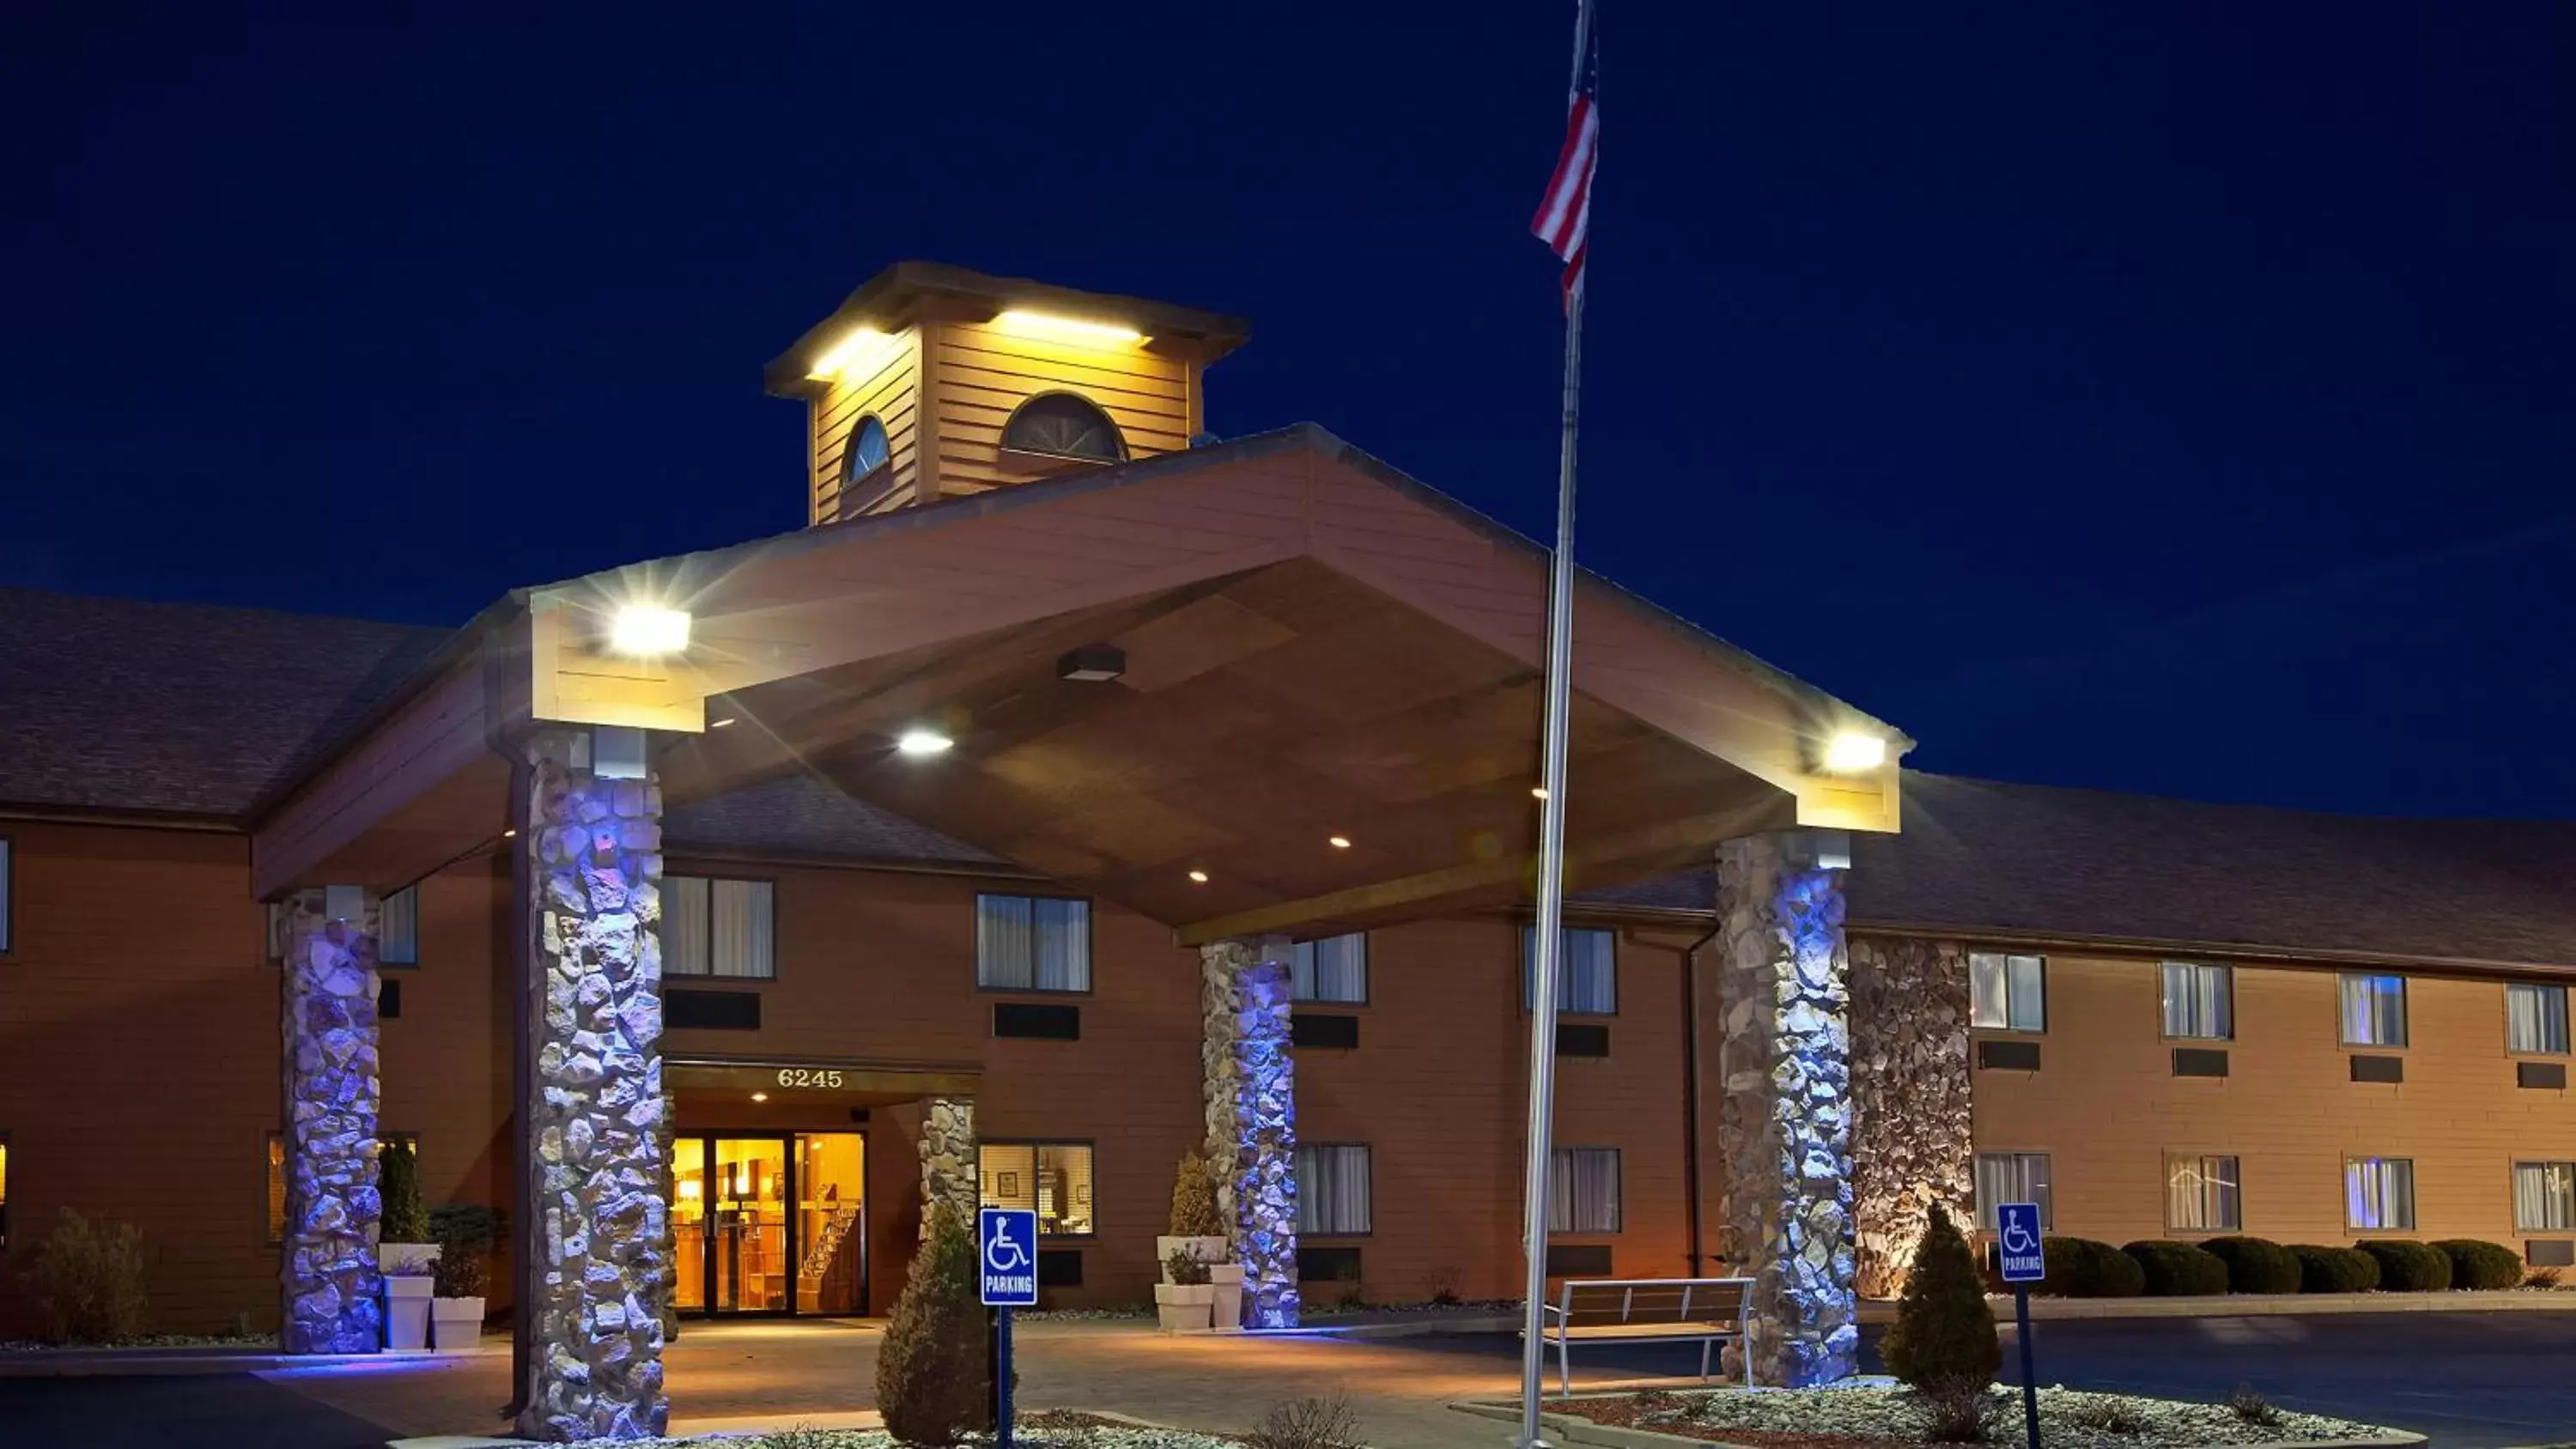 Property building in SureStay Plus by Best Western Fremont I-69